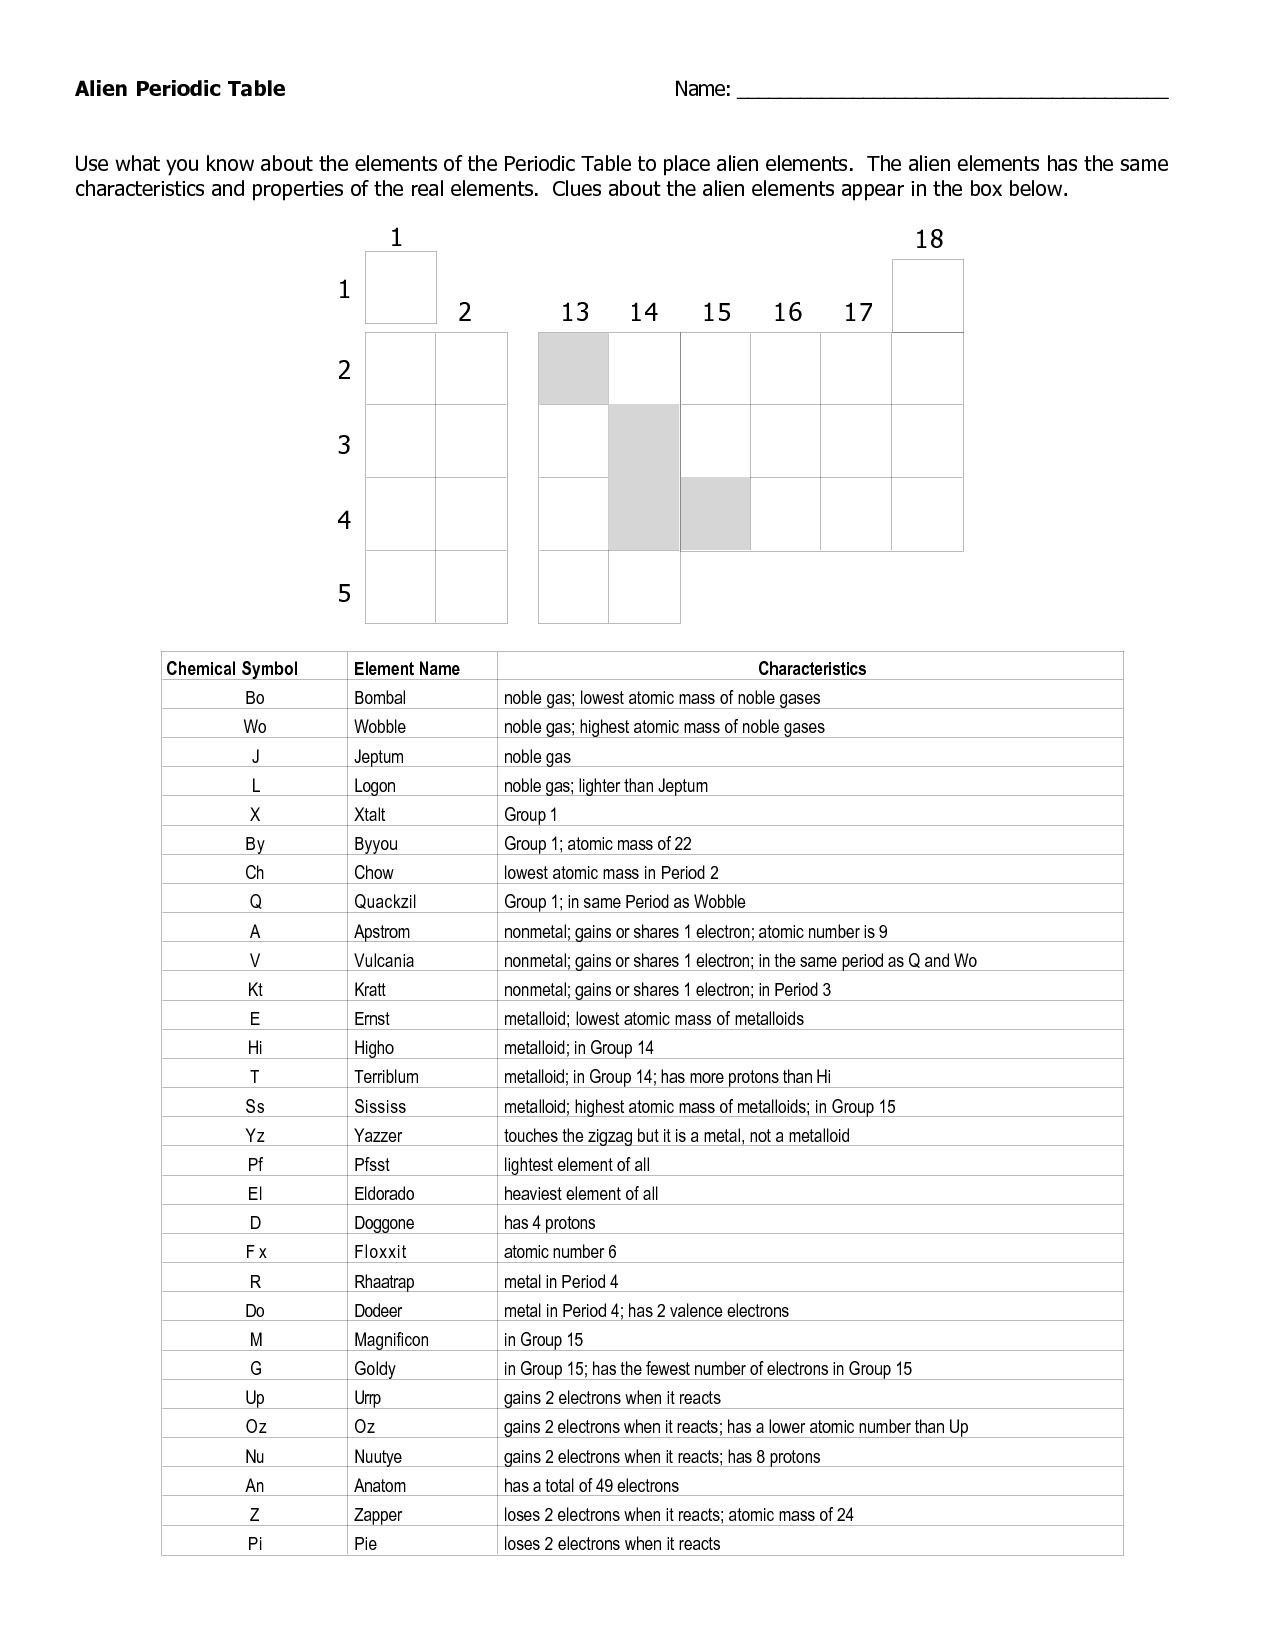 12-best-images-of-periodic-table-worksheets-pdf-white-periodic-table-periodic-table-trends